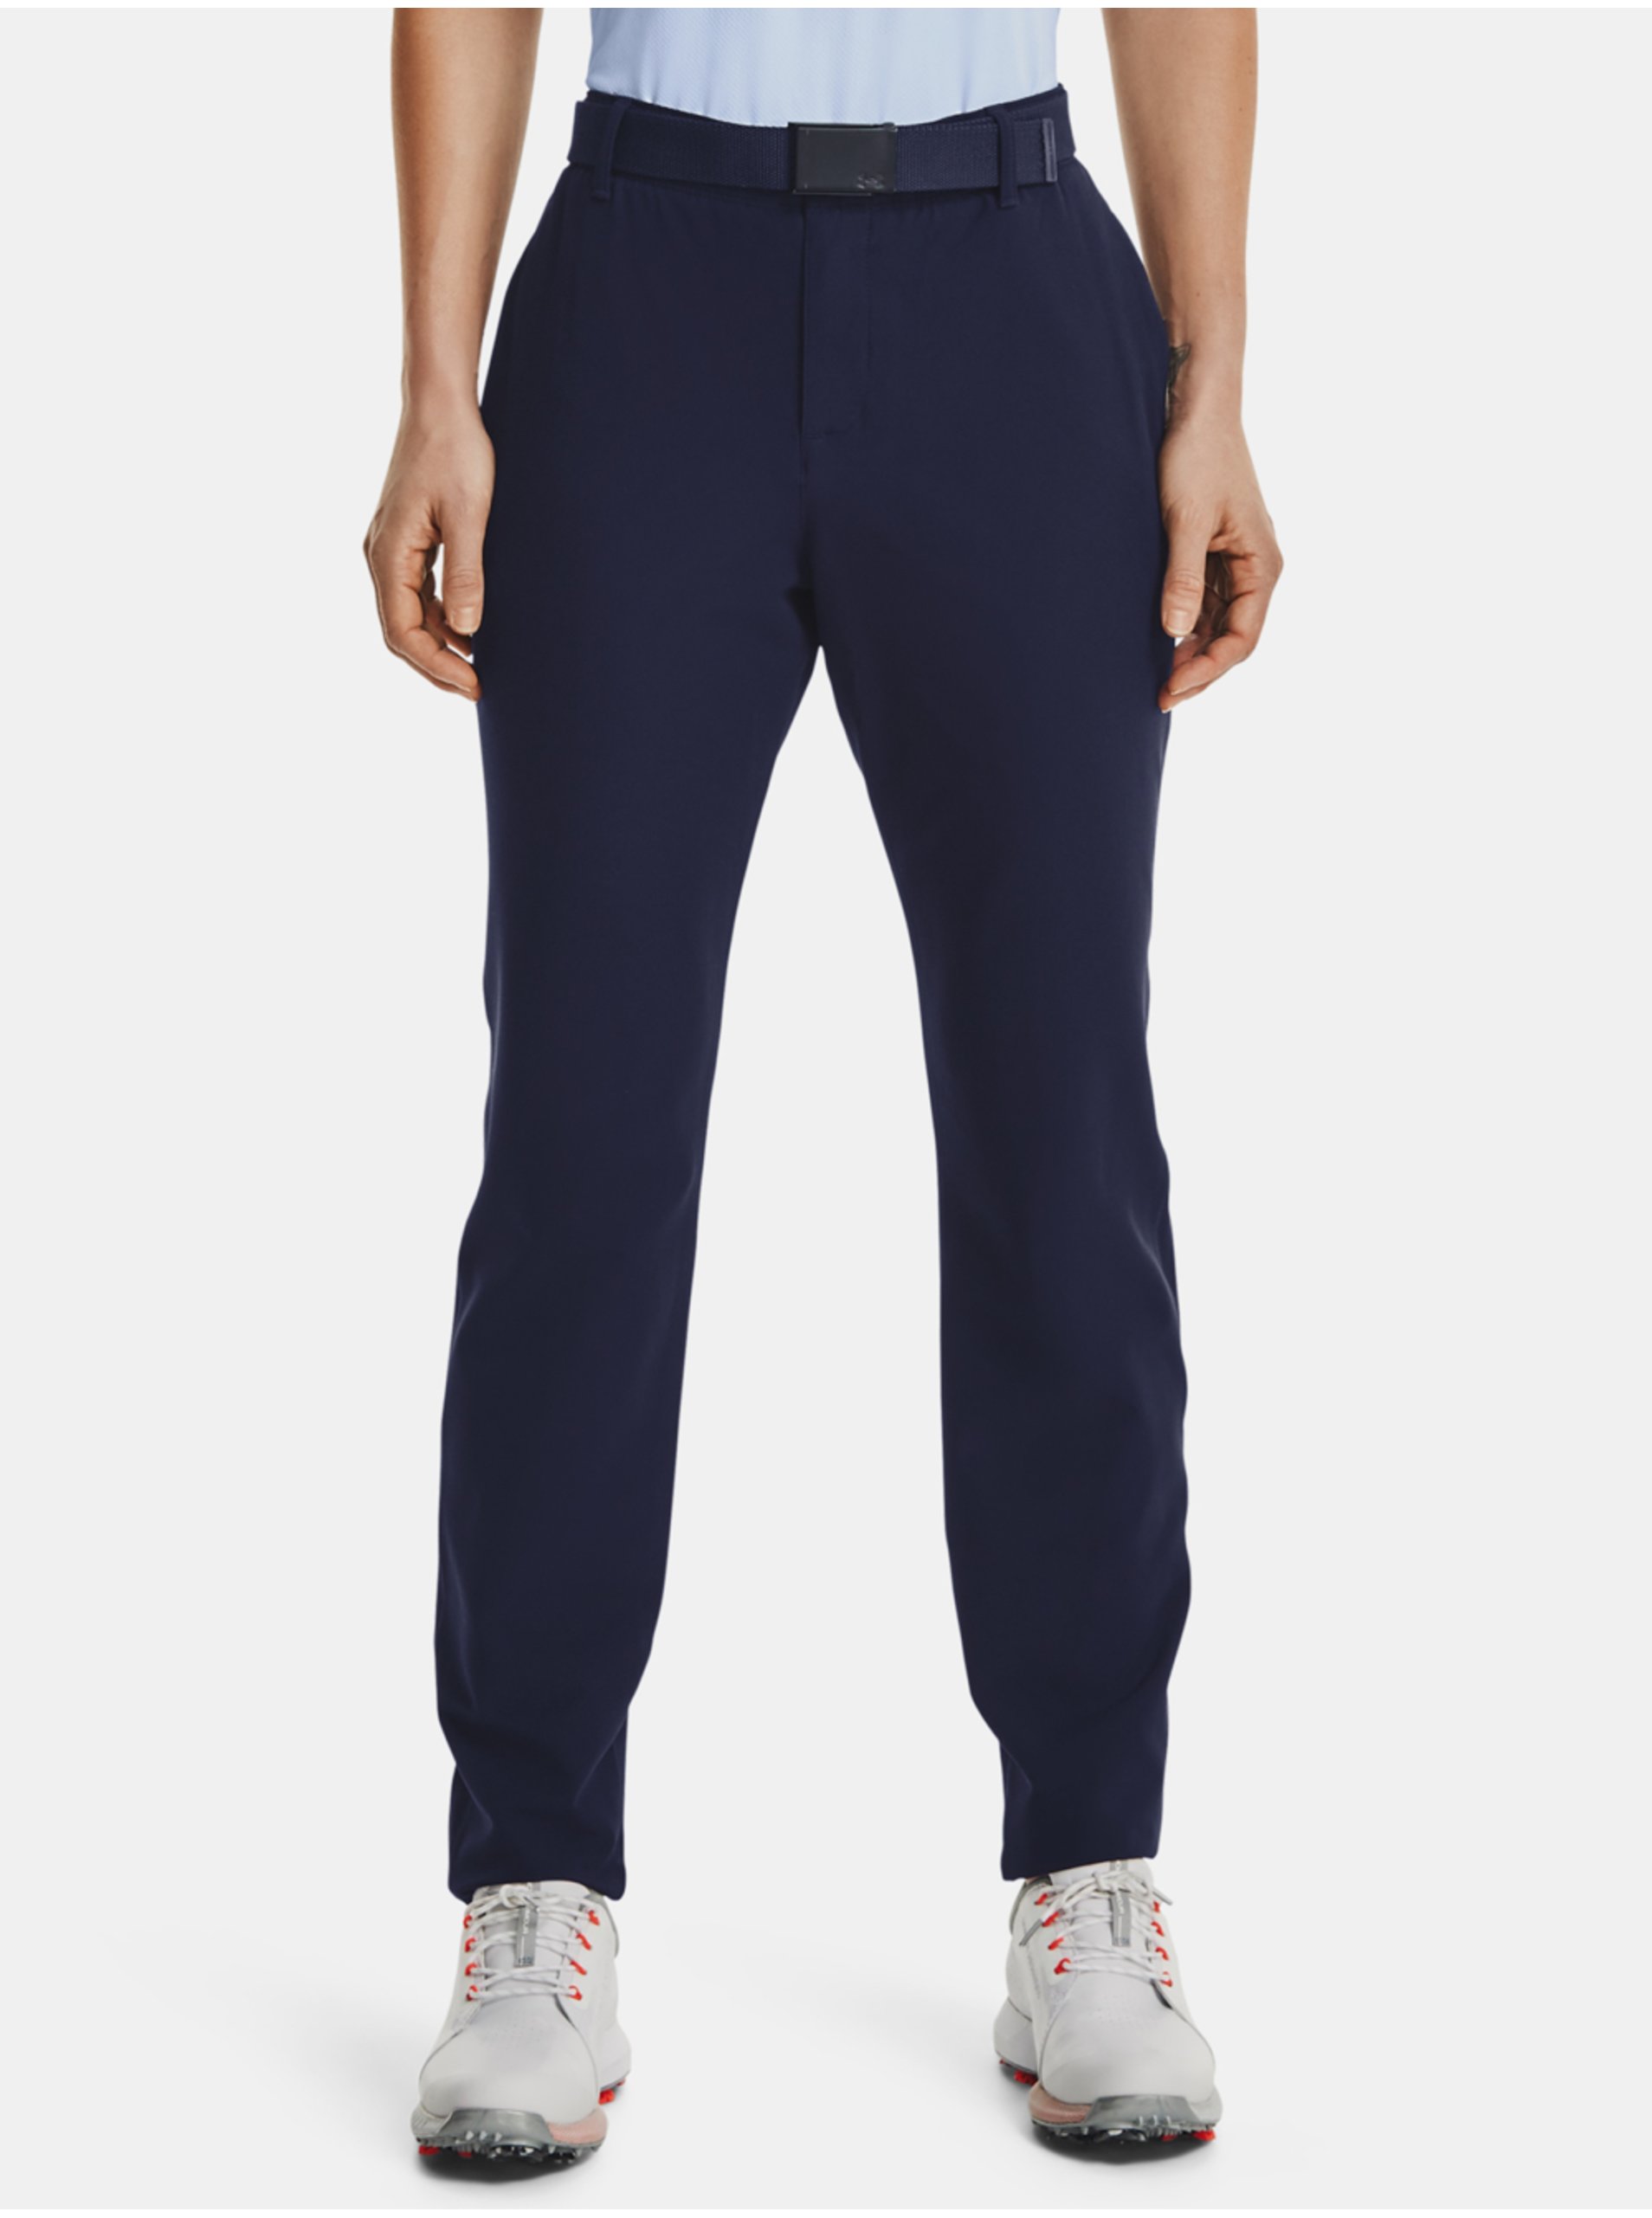 Lacno Nohavice Under Armour Links Pant-NVY